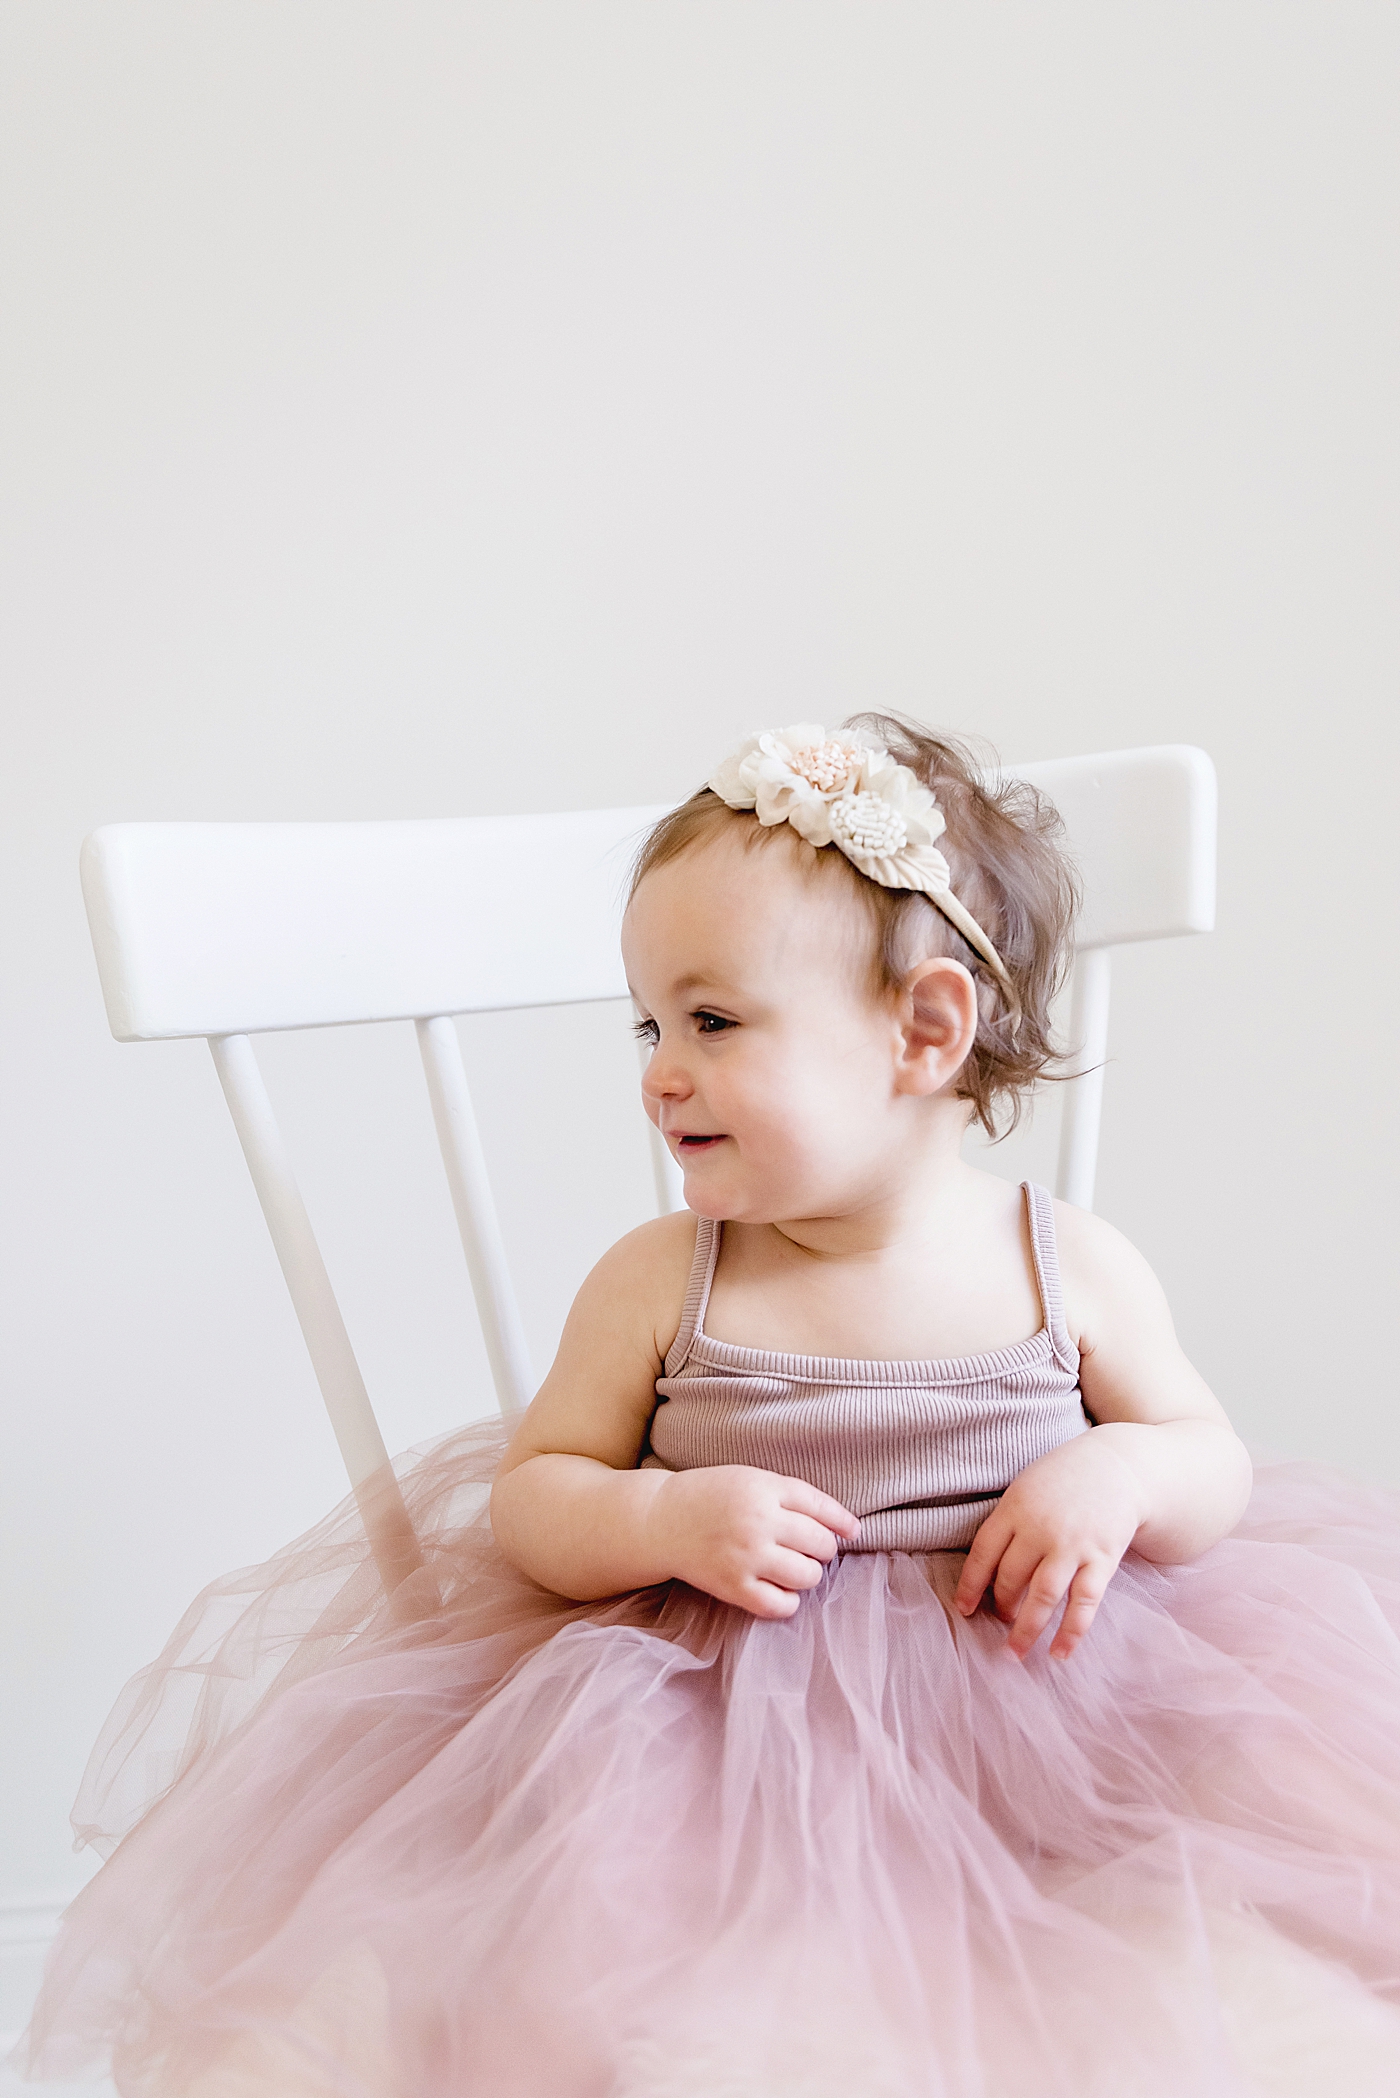 Baby girl in pink with floral bow sitting on white chair | Photo by Huntersville Baby Photographer Anna Wisjo 